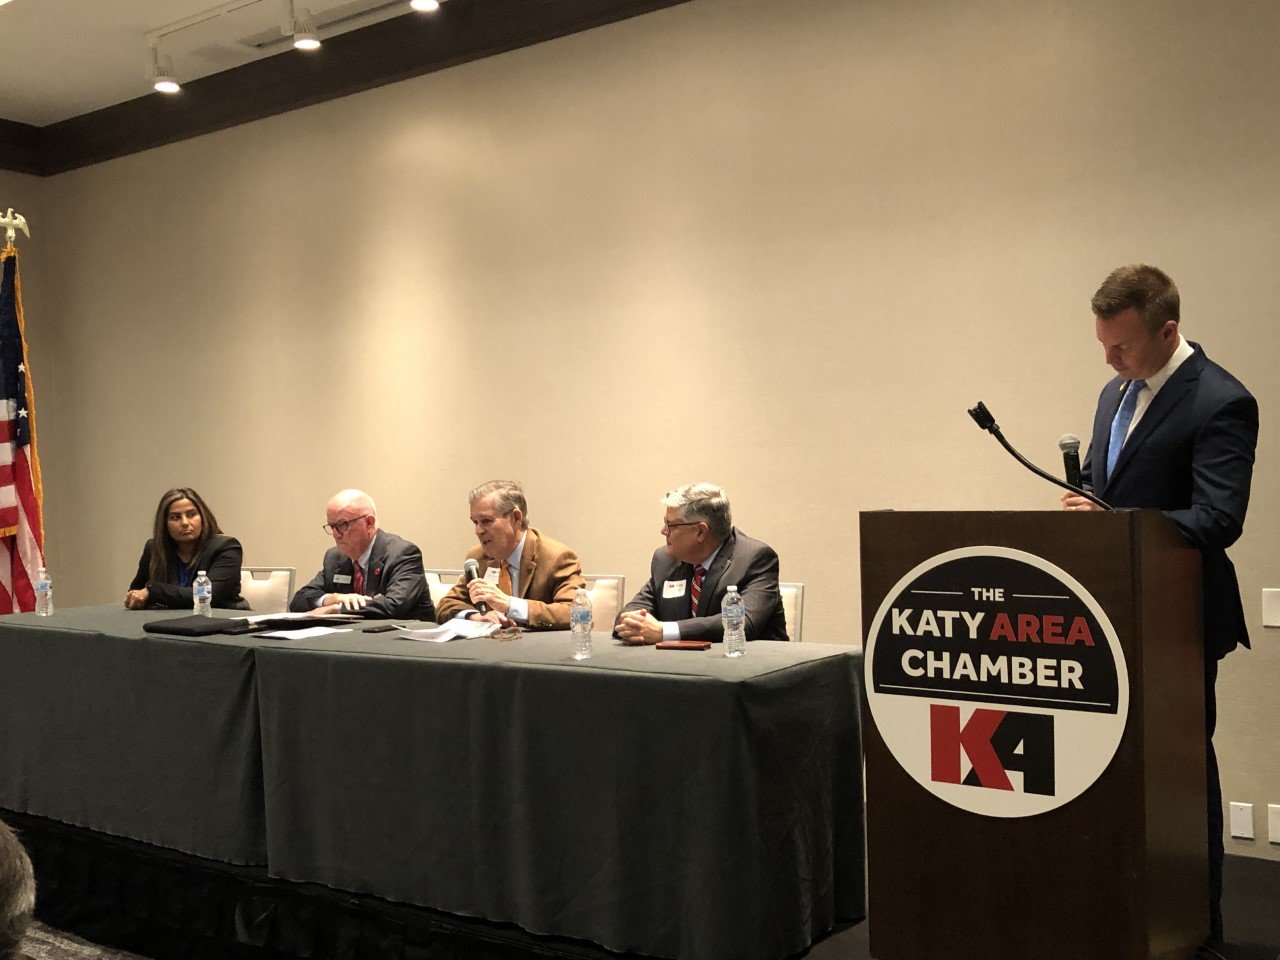 From left, Seelpa Keshvala, Bob Glenn, Zach Hodges and Jay Neal discuss the state of higher education in Katy at a Feb. 17 Katy Area Chamber of Commerce luncheon. Jason Burdine, a financial advisor who serves on the chamber’s education committee, stands at the podium.